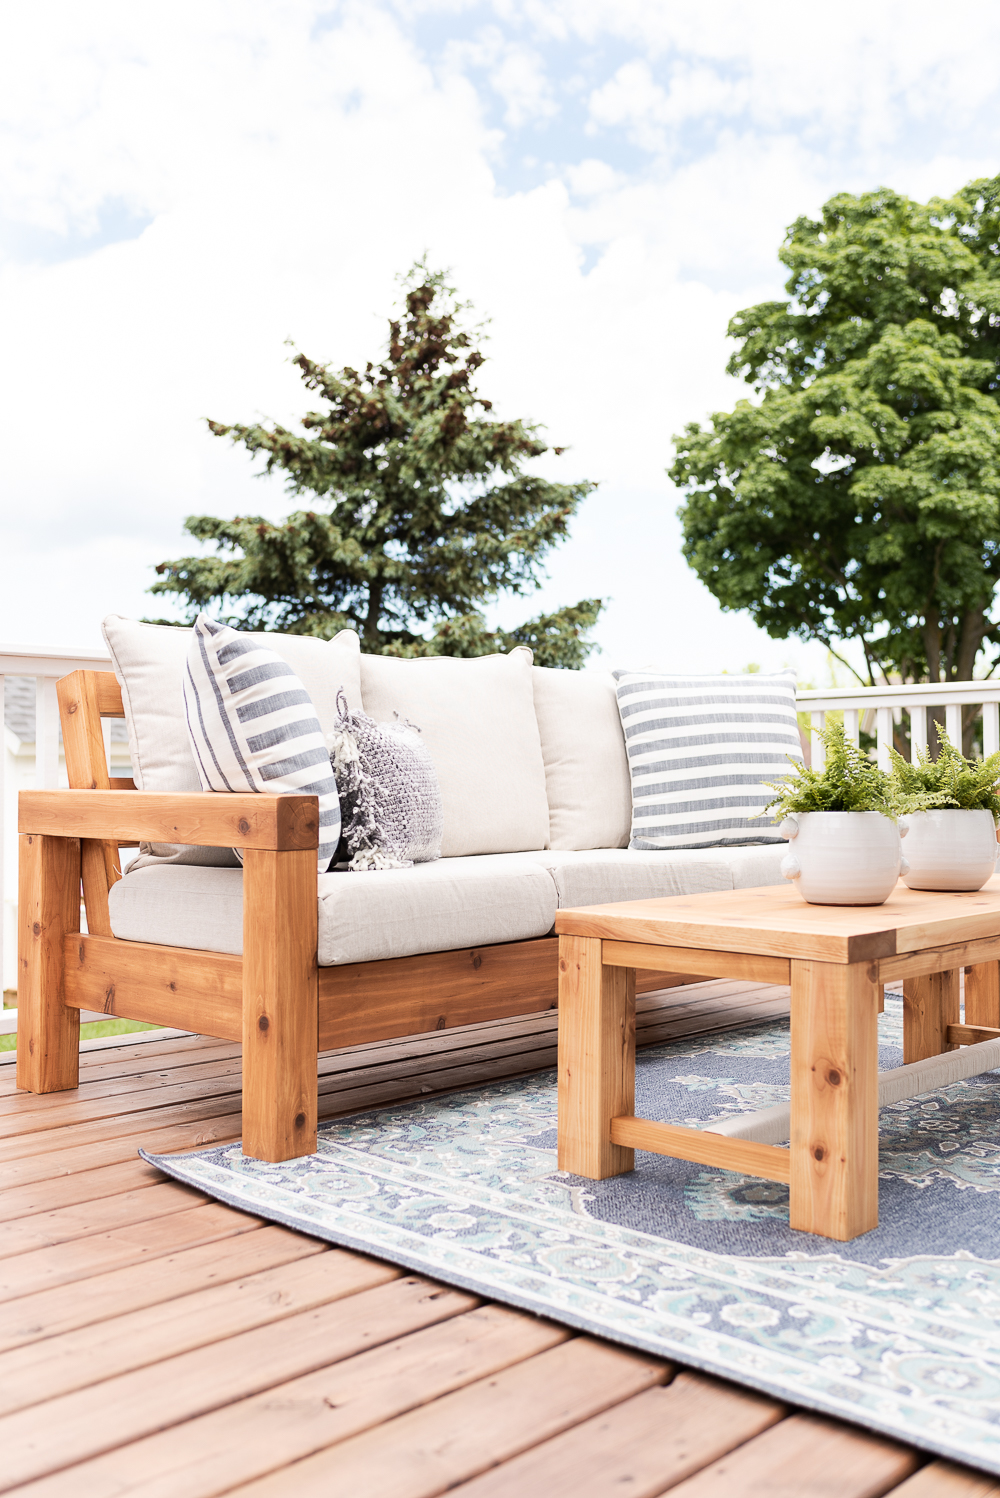 The Perfect Outdoor Sofa Free Plans, How To Make A Wooden Outdoor Corner Sofa